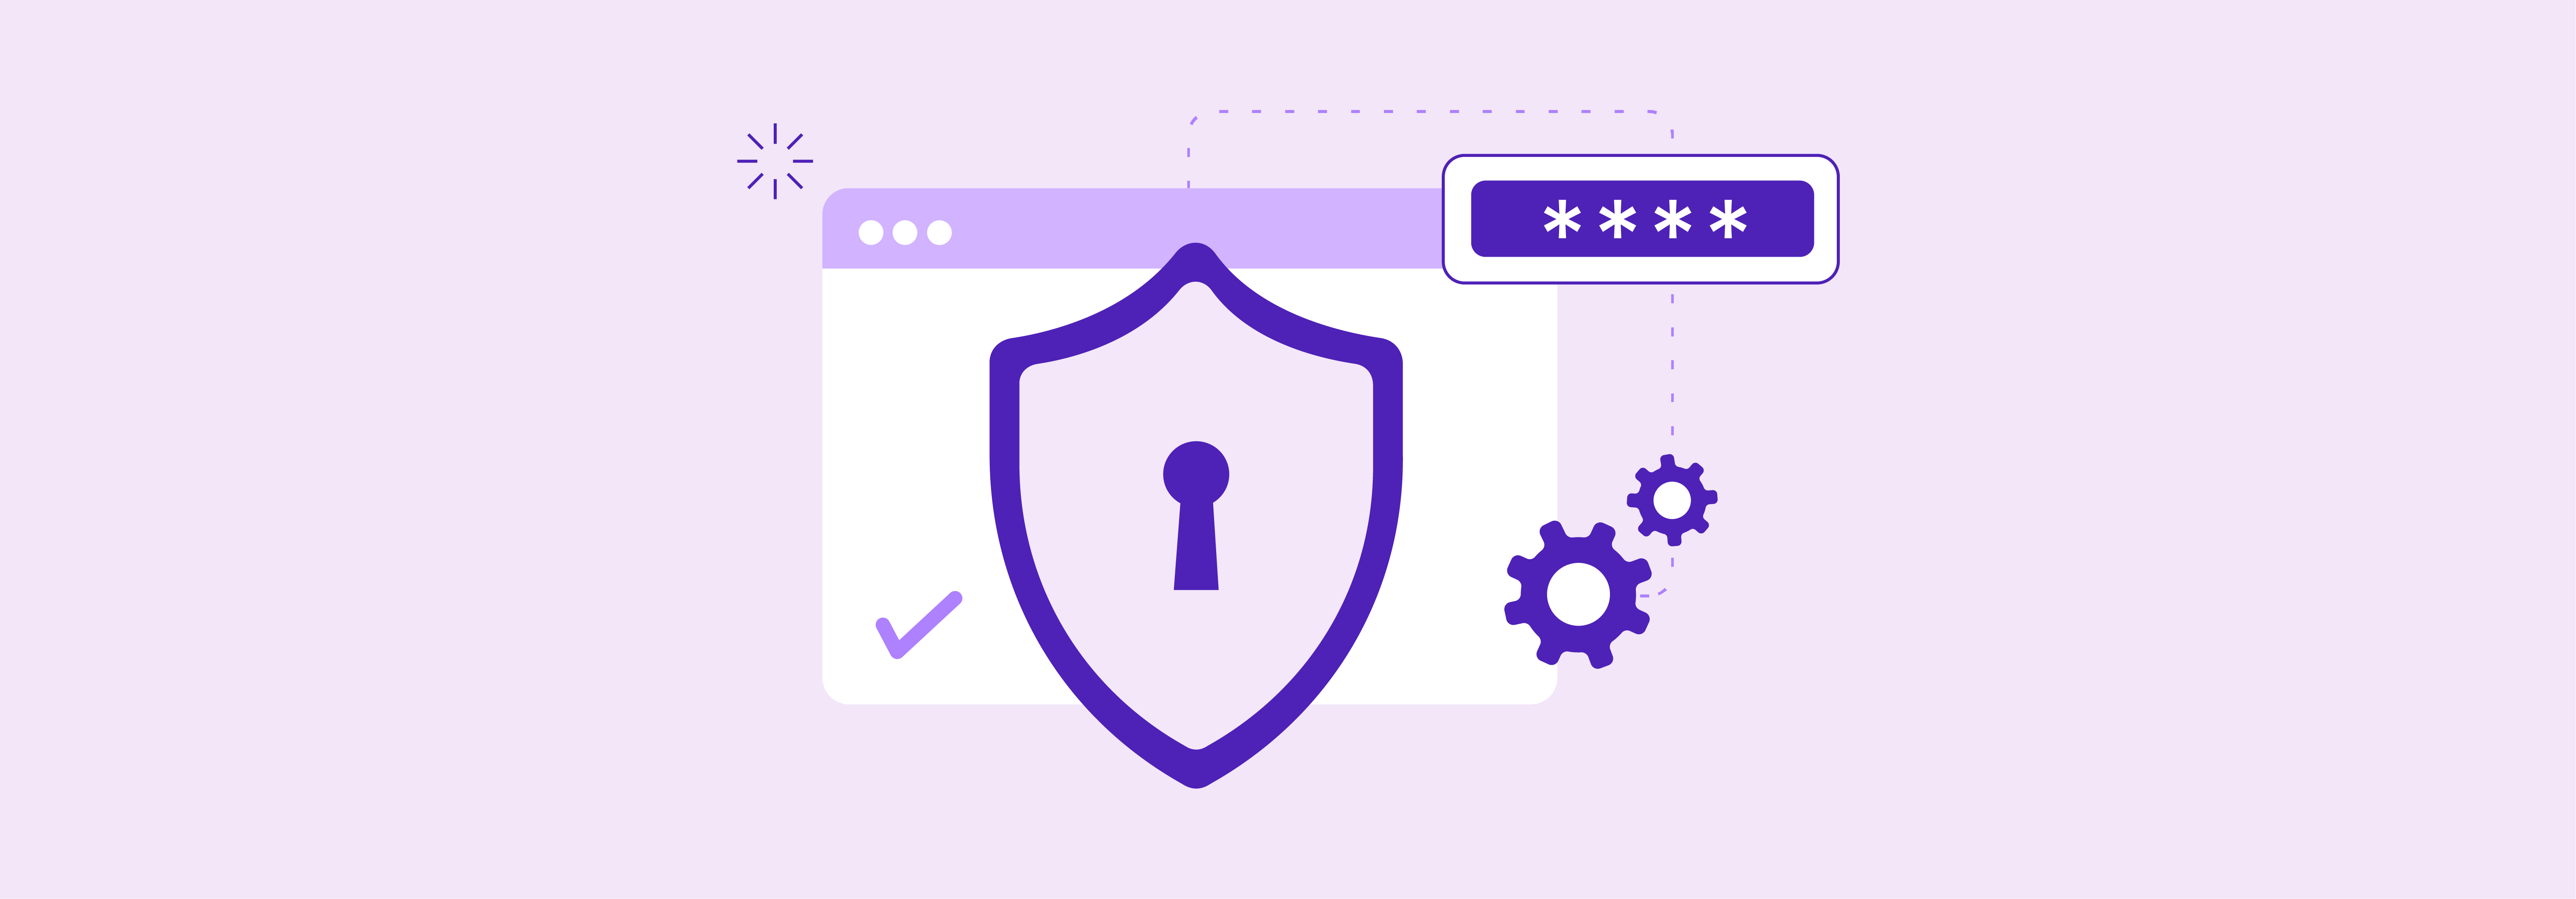 Magento Consultant Recommends Security